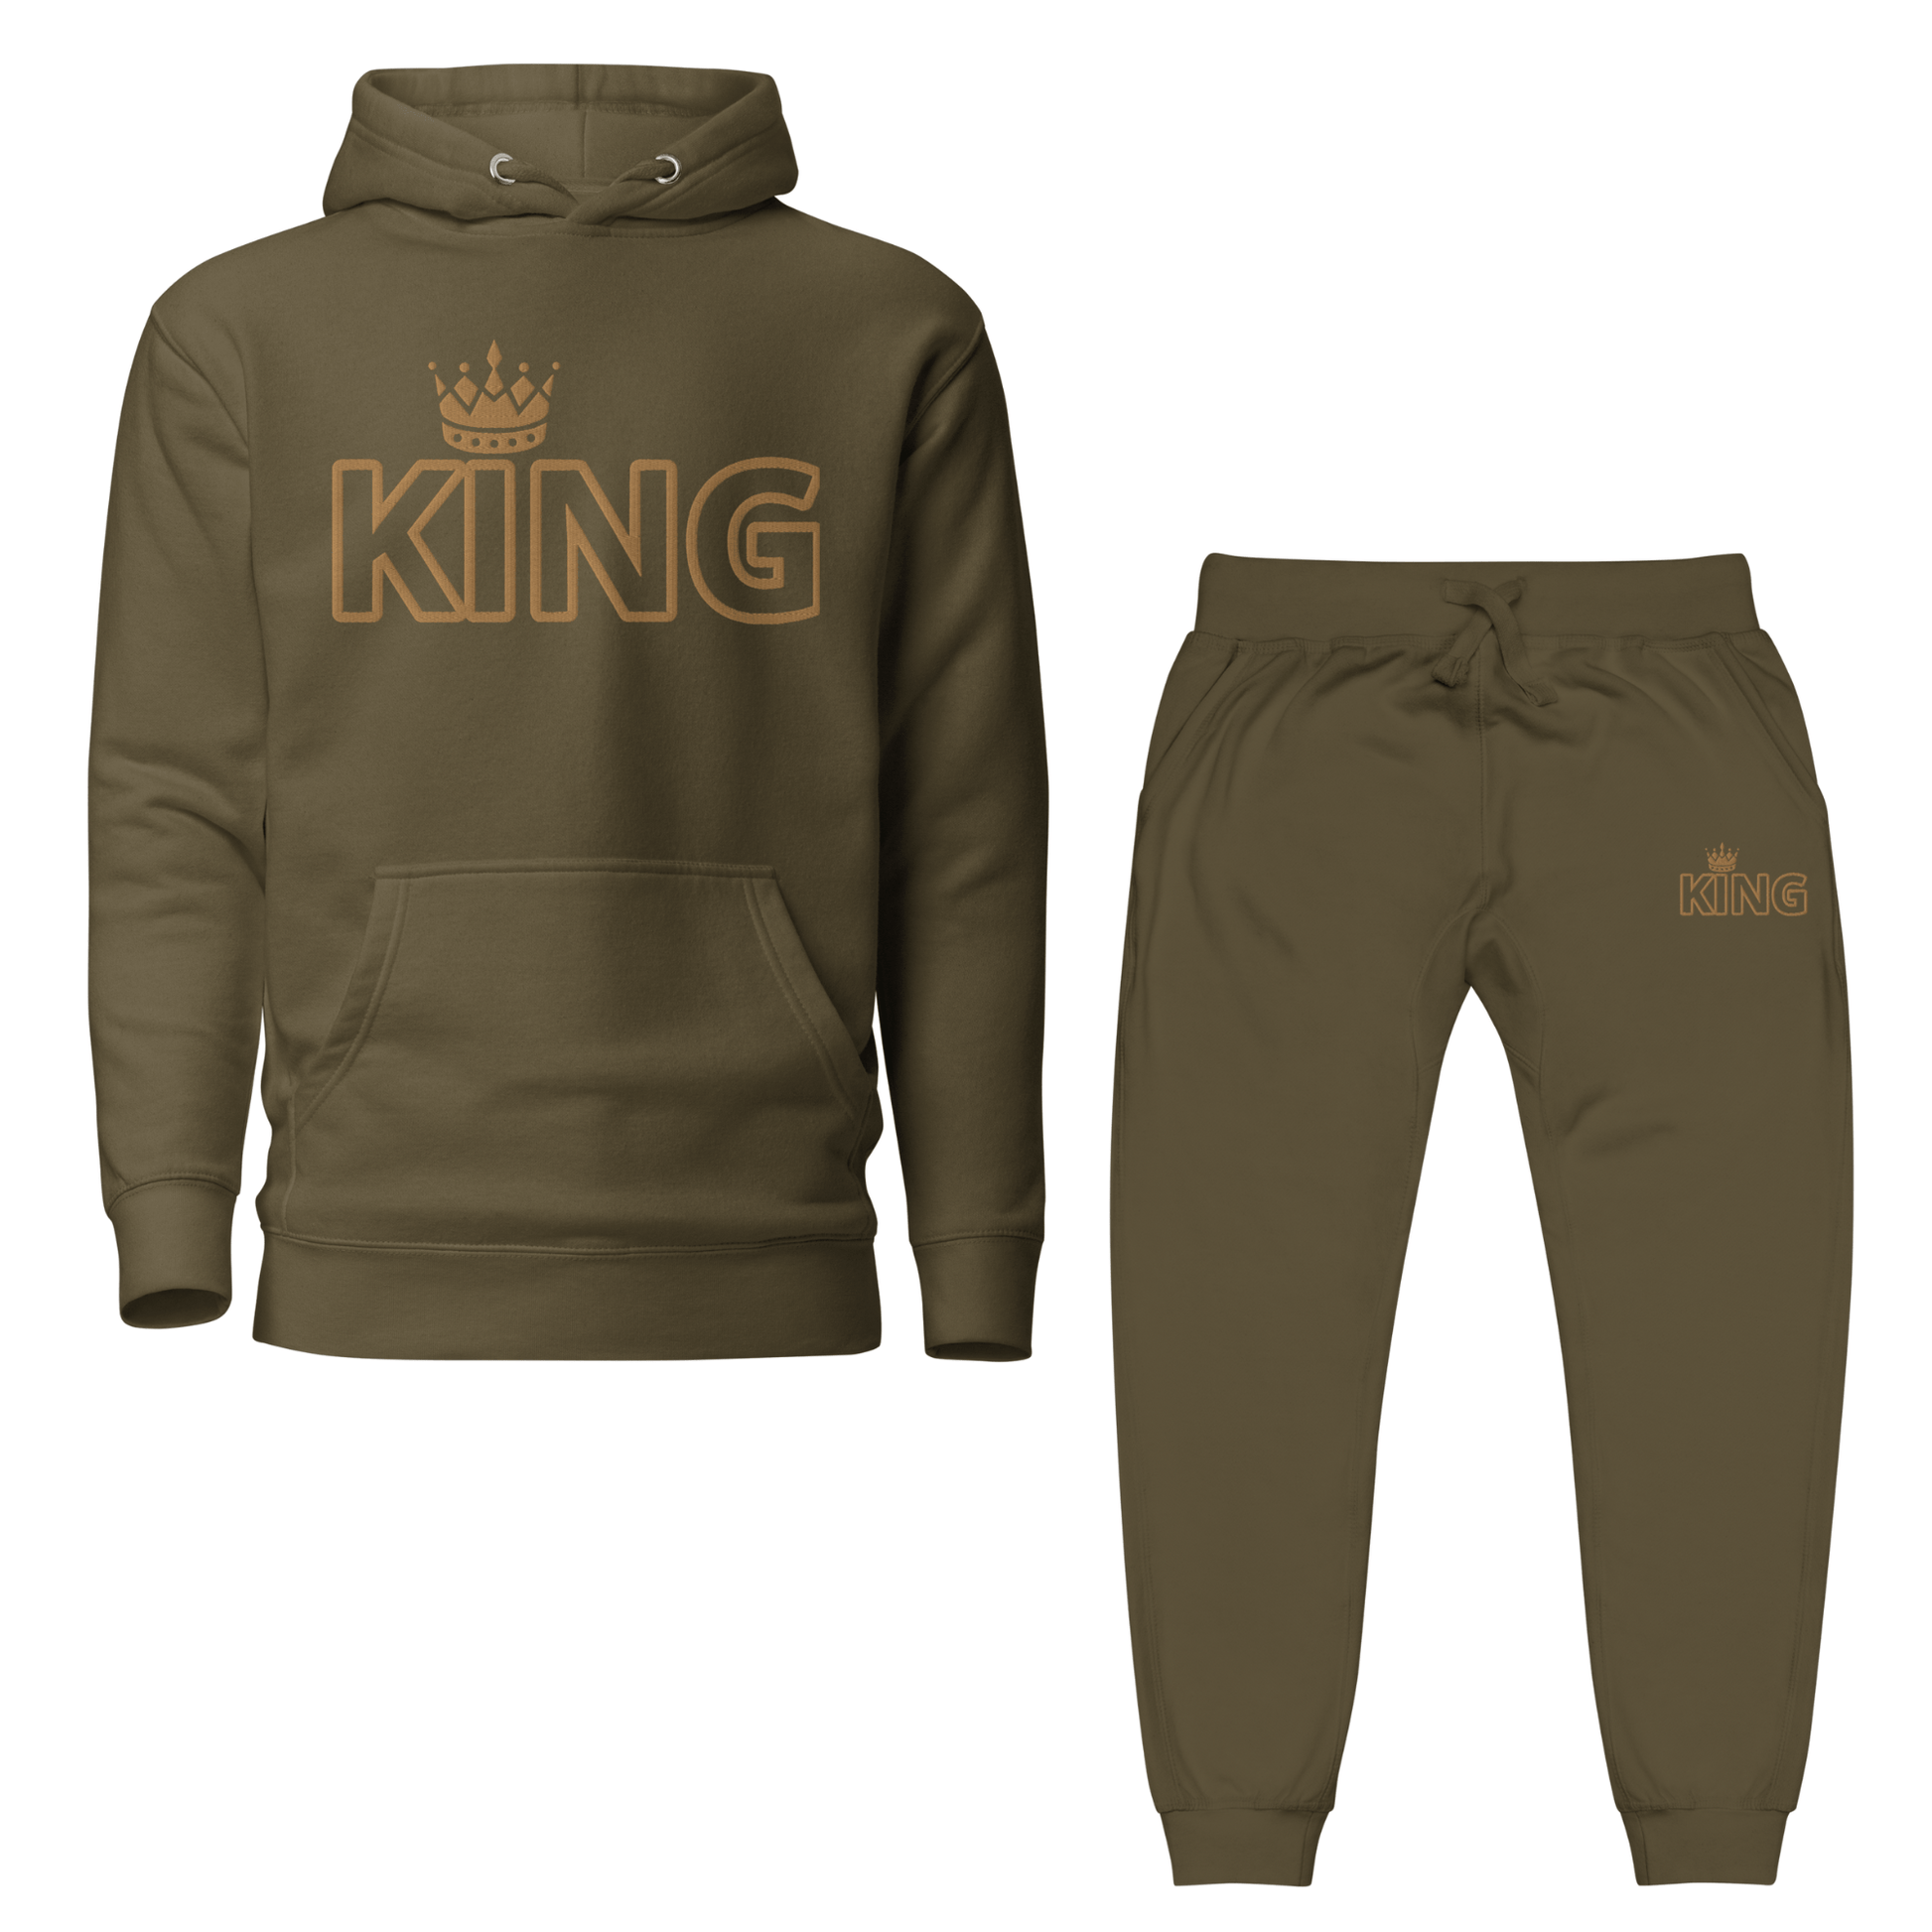 Men's King Crown Hoodie And Jogger Outfit Set - King Exchange Apparel 